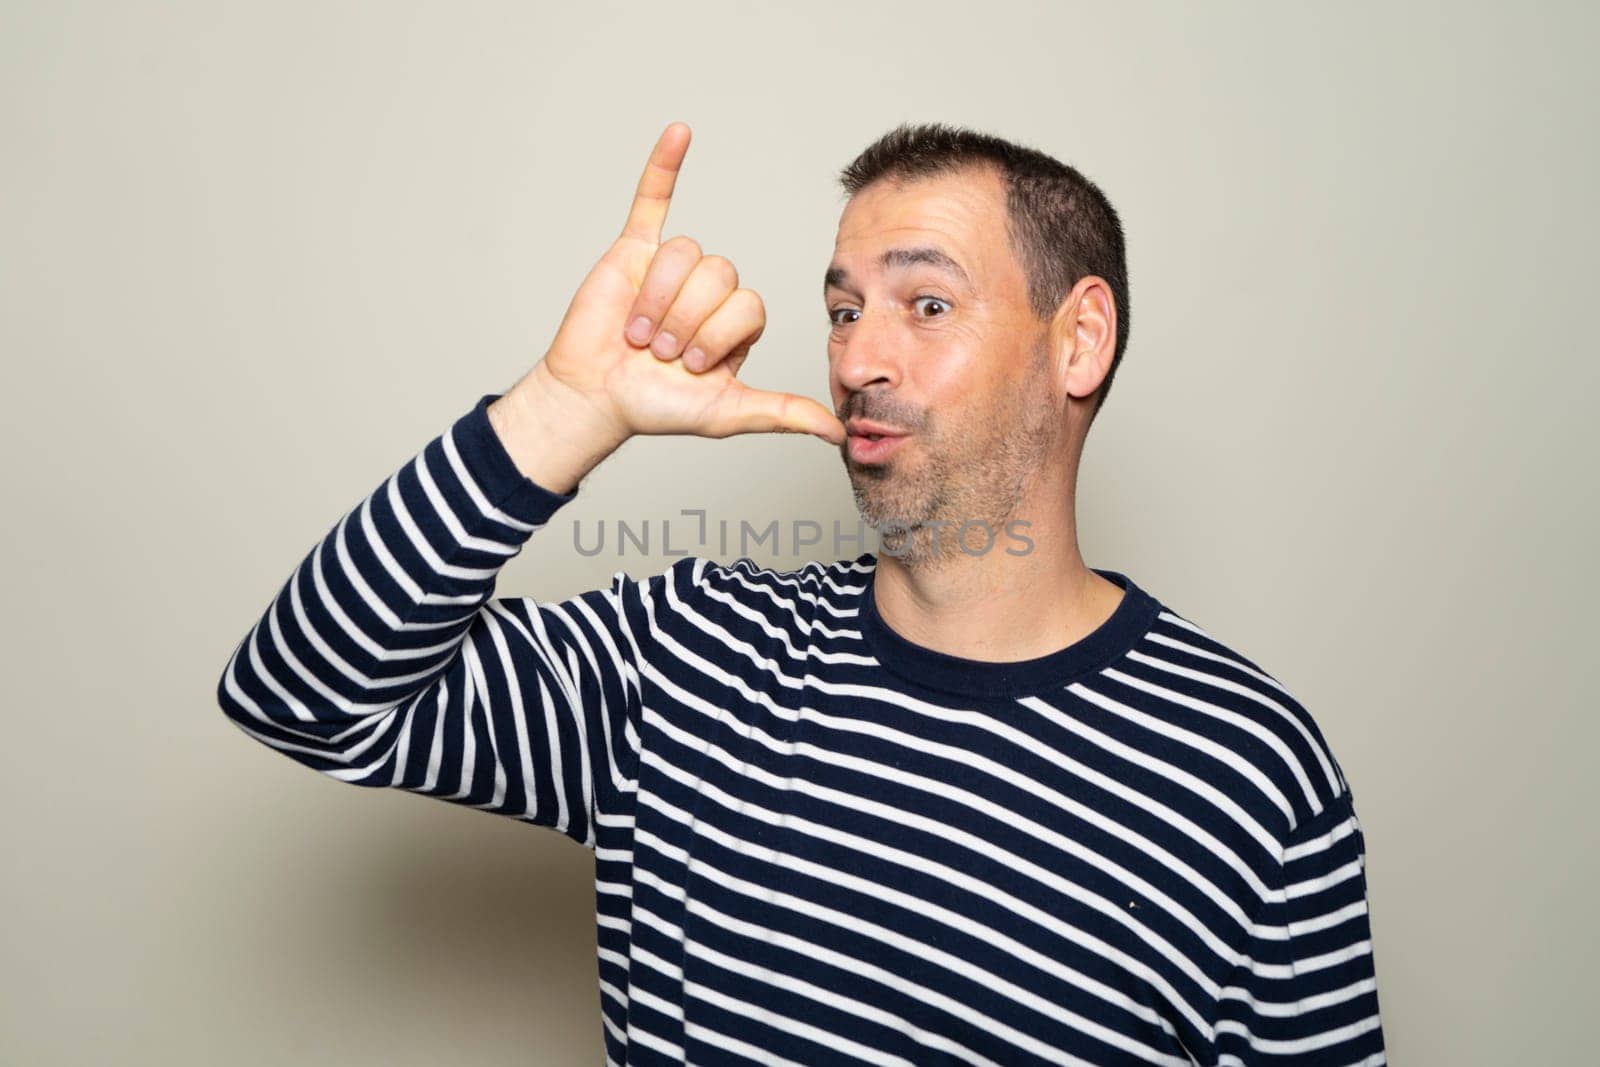 Hispanic man with beard in his 40s wearing a striped sweater making the gesture of being drunk isolated on beige studio background.